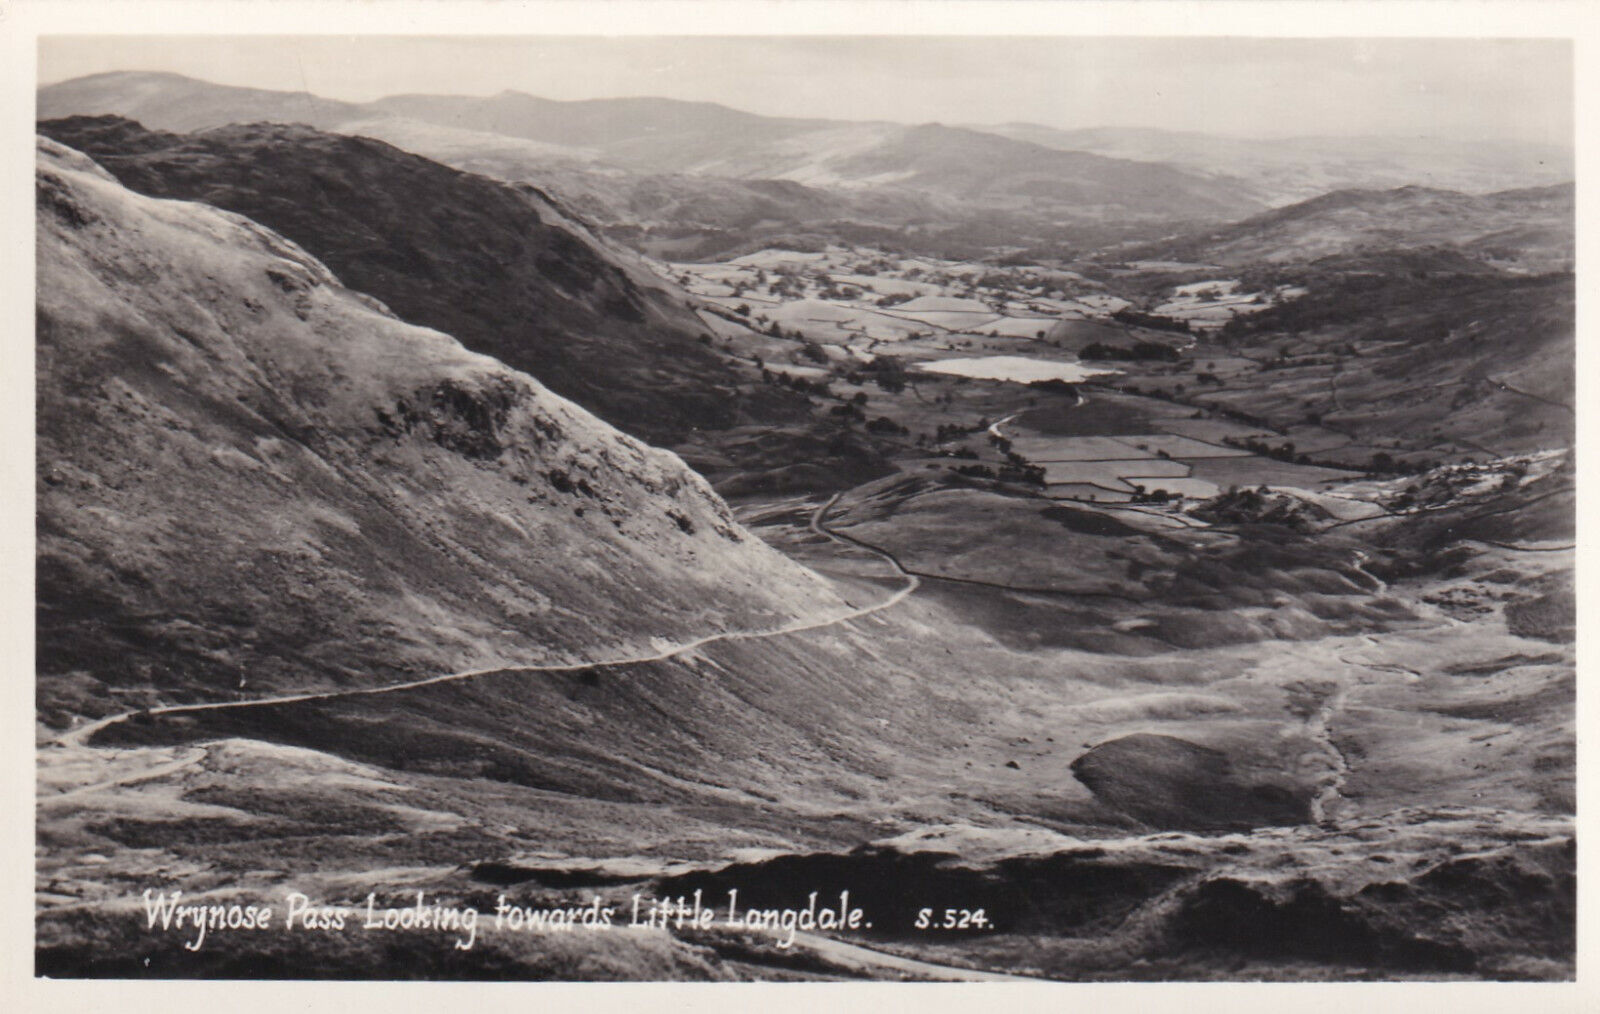 House Clearance - Service Wrynose Pass Looking towards Little Langdale, Cumbria